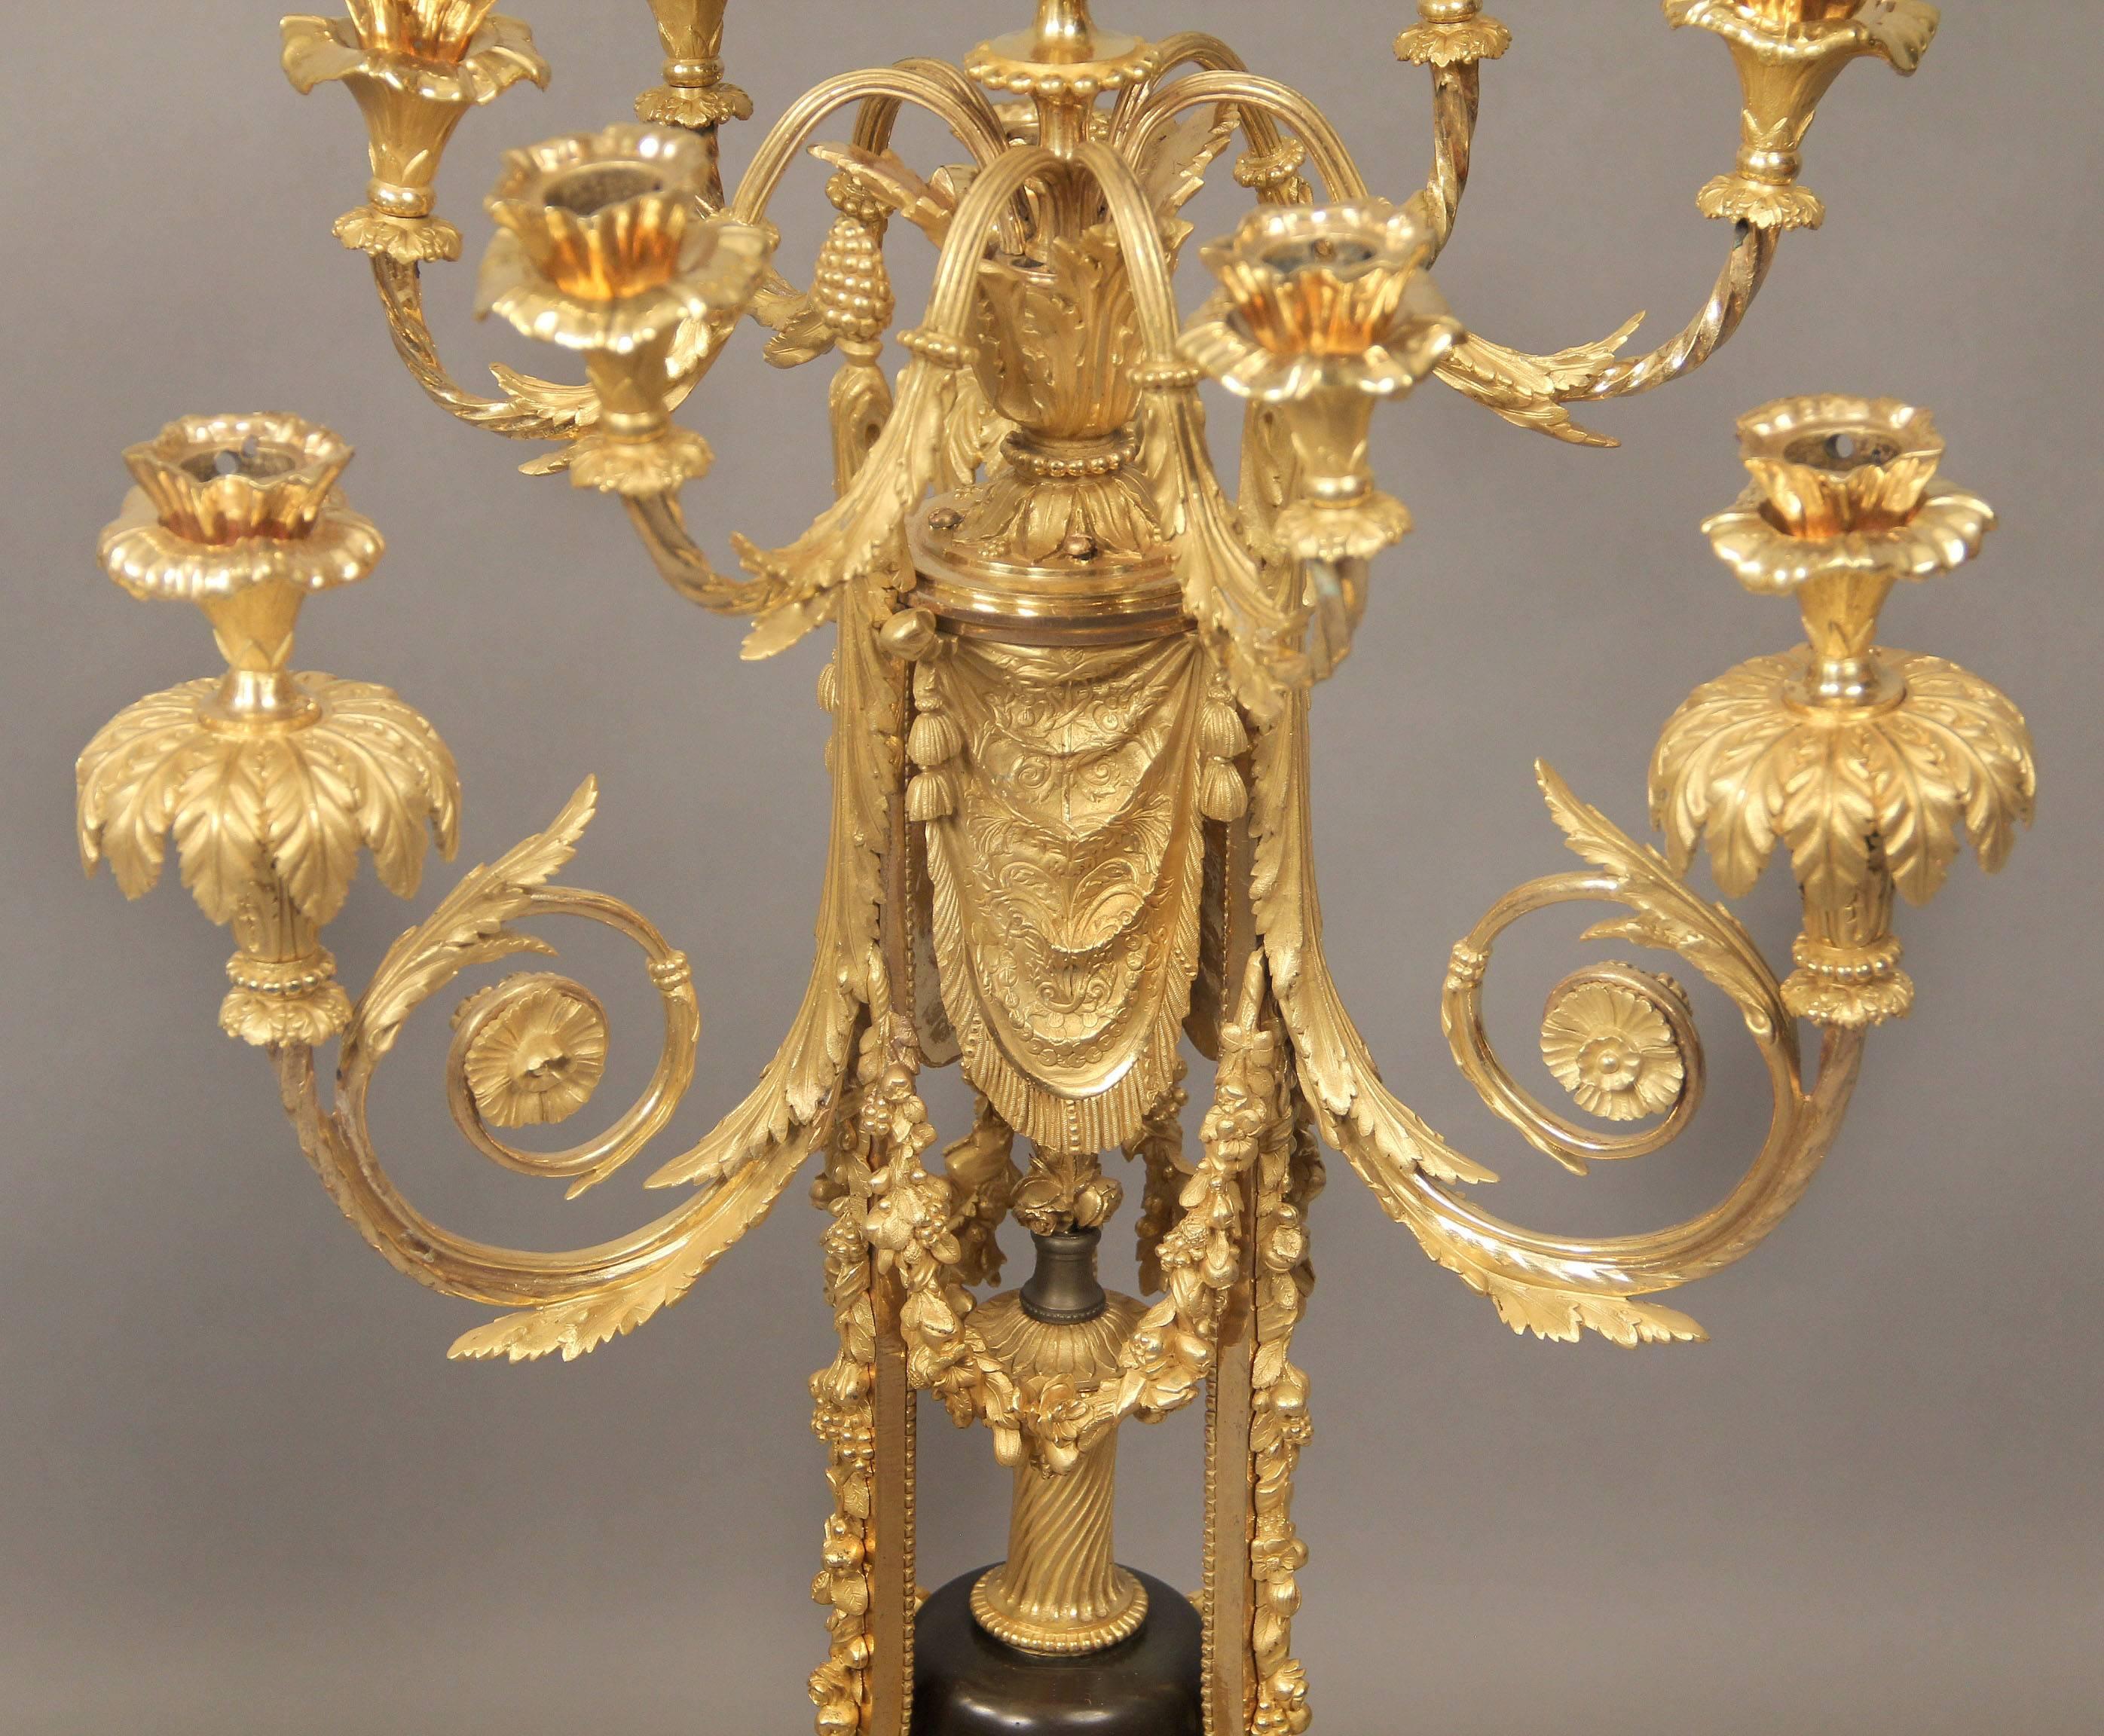 An Exceptional Pair of Late 19th Century Napoleon III Gilt Bronze and Enamel Ten Light Candelabra

Attributed to Maison Beurdeley

The ten candle foliate designed branches with leaf drip pans, centered with an enamel vase and a gilt band with